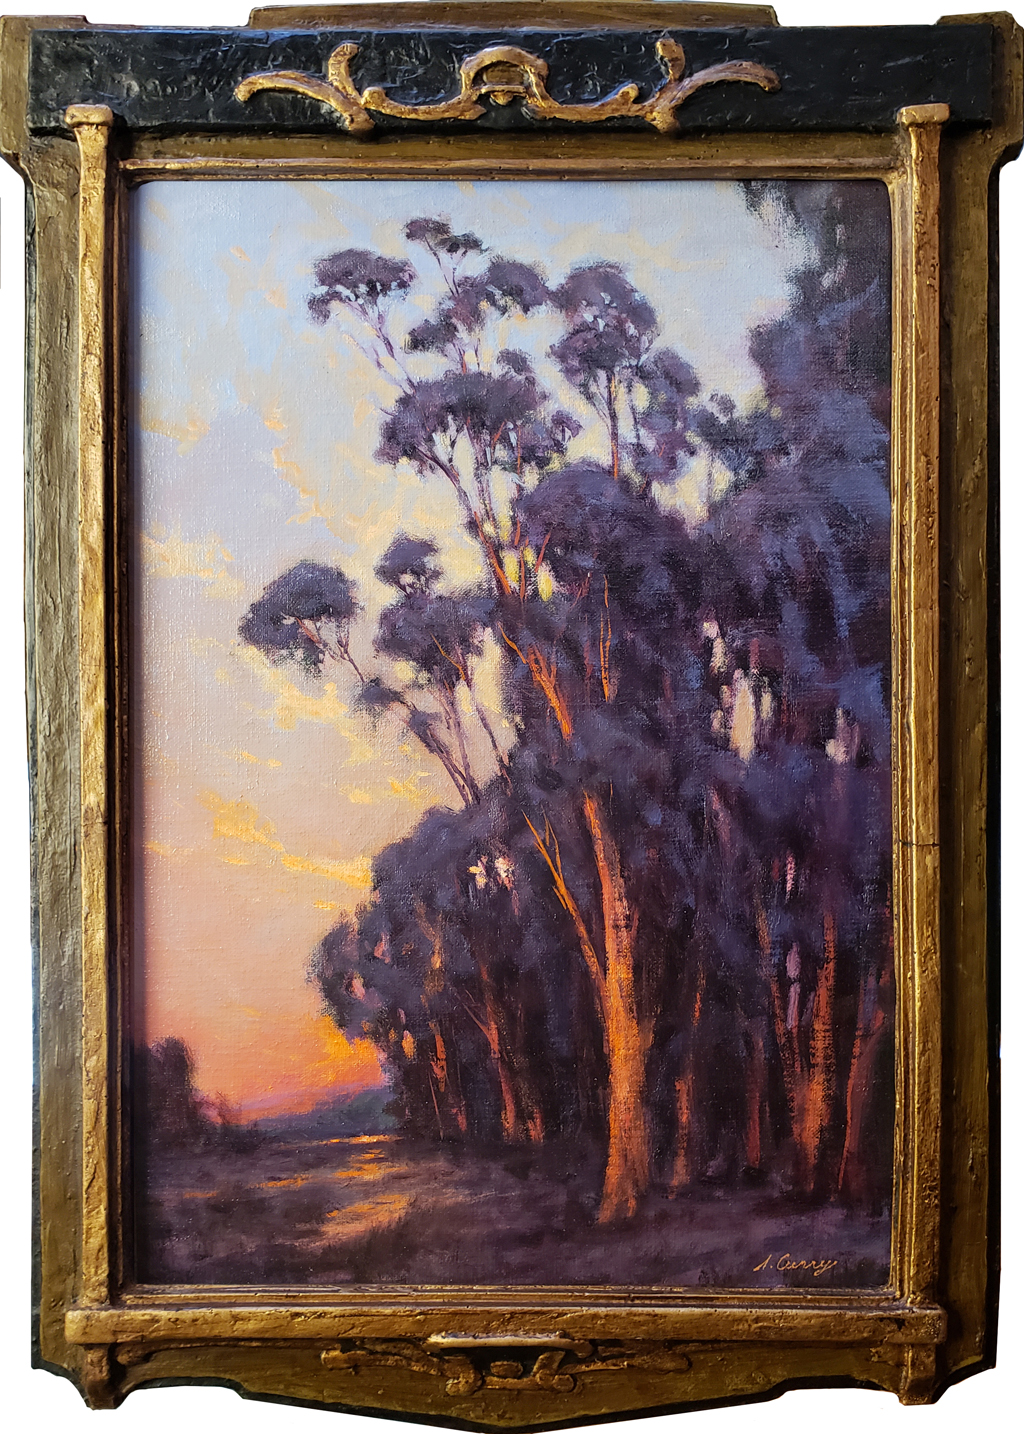 American Legacy Fine Arts presents "Upward; Sonoma County" a painting by Steve Curry.